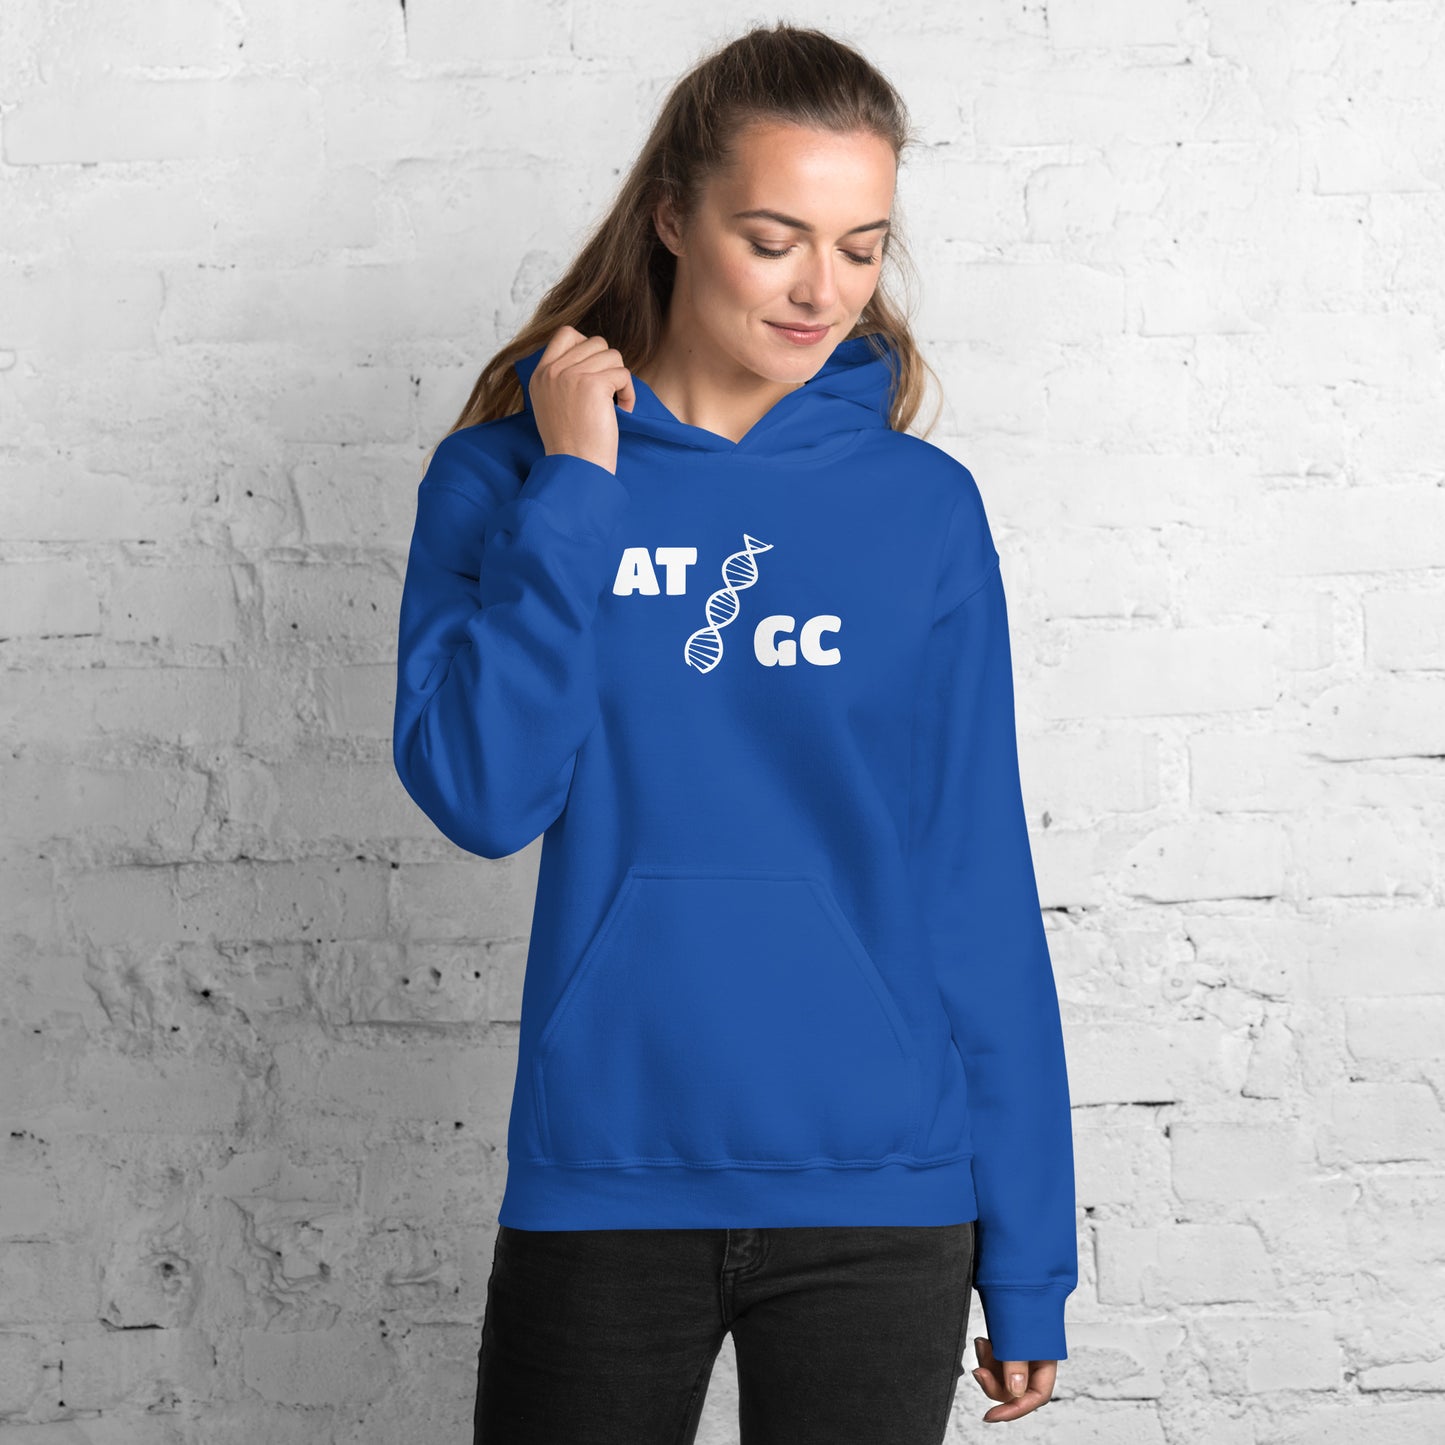 Women with royal blue hoodie with image of a DNA string and the text "ATGC"